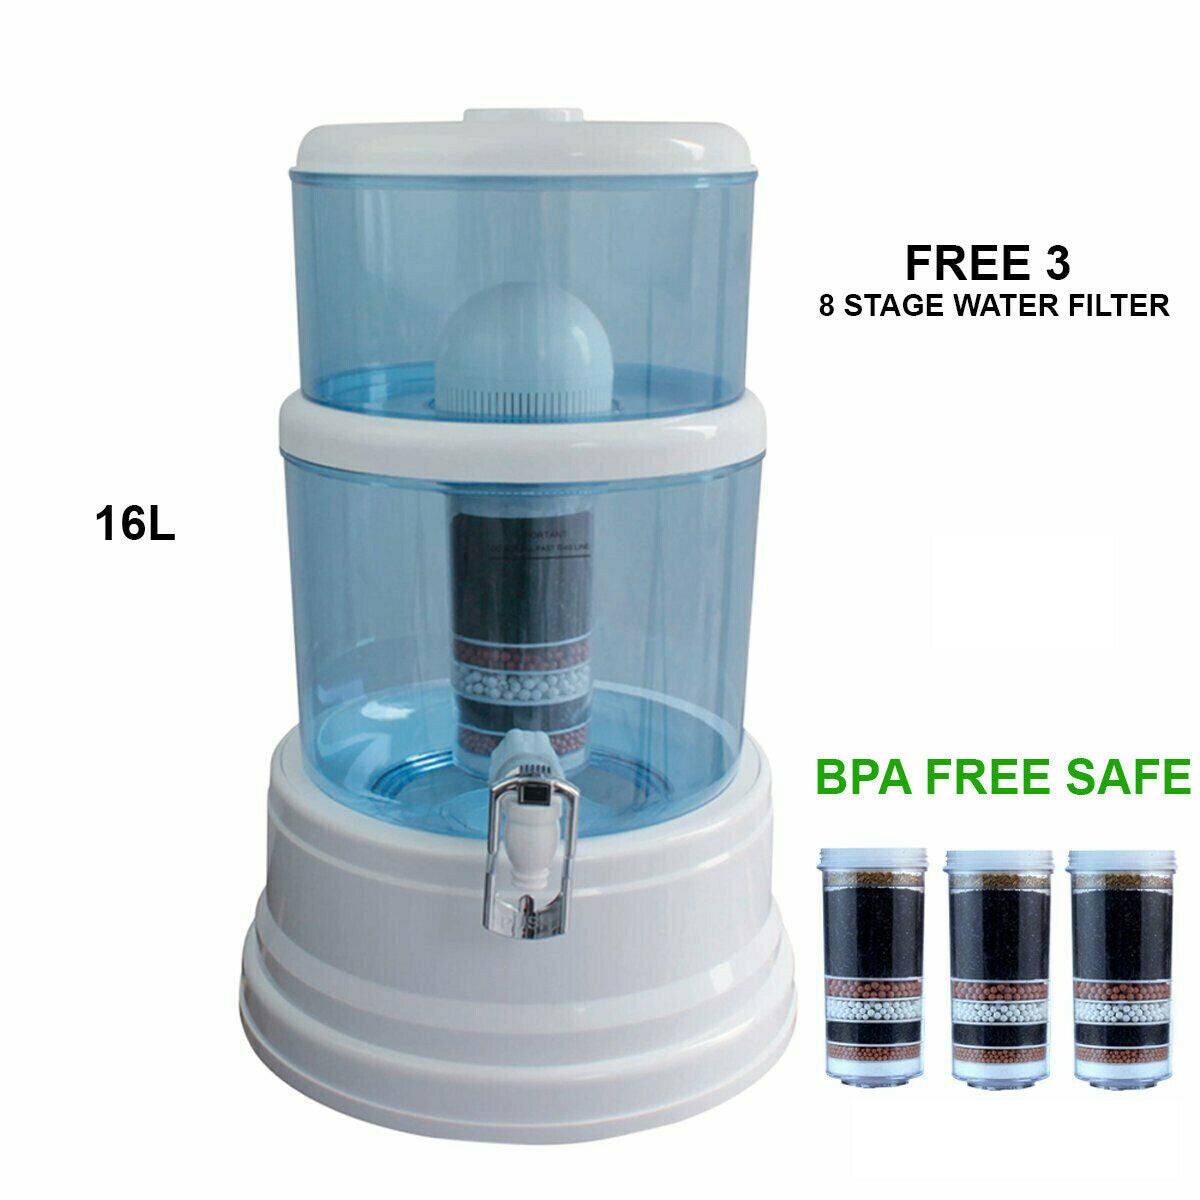 16L Water Dispenser Benchtop Purifier With 3 Filters